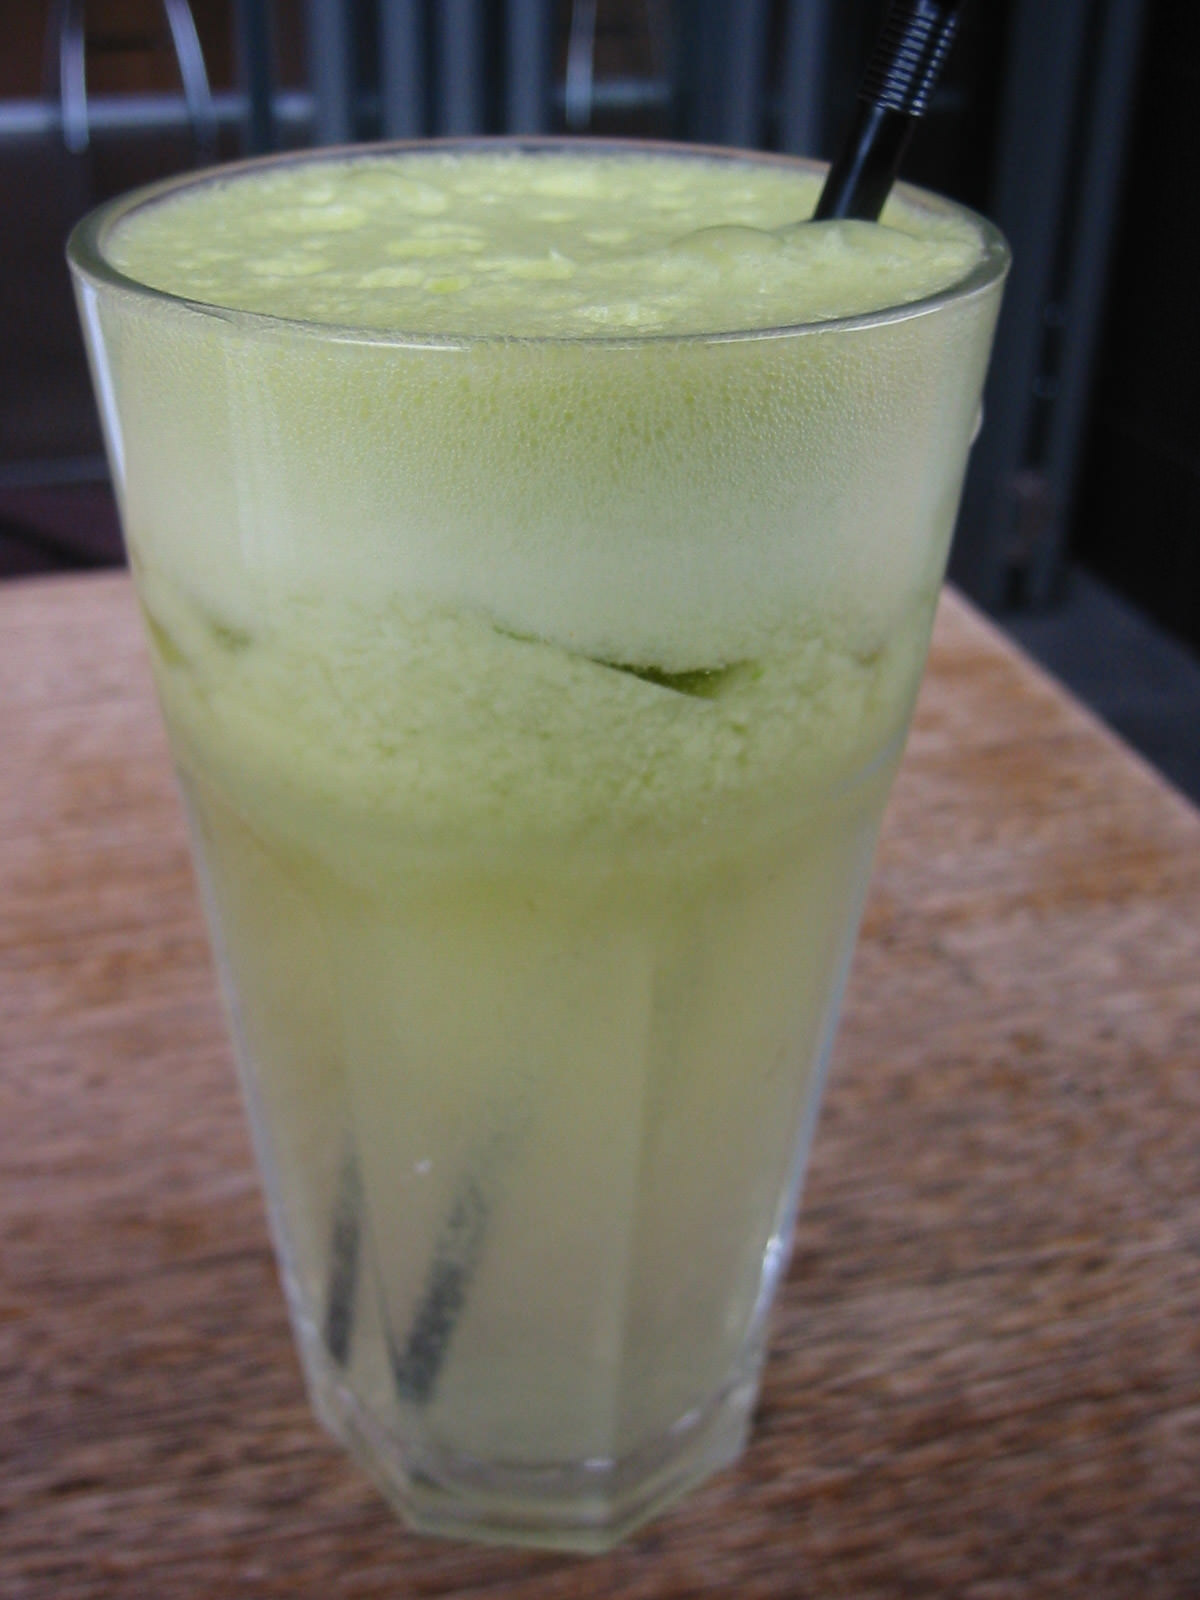 Apple, mint and lime juice